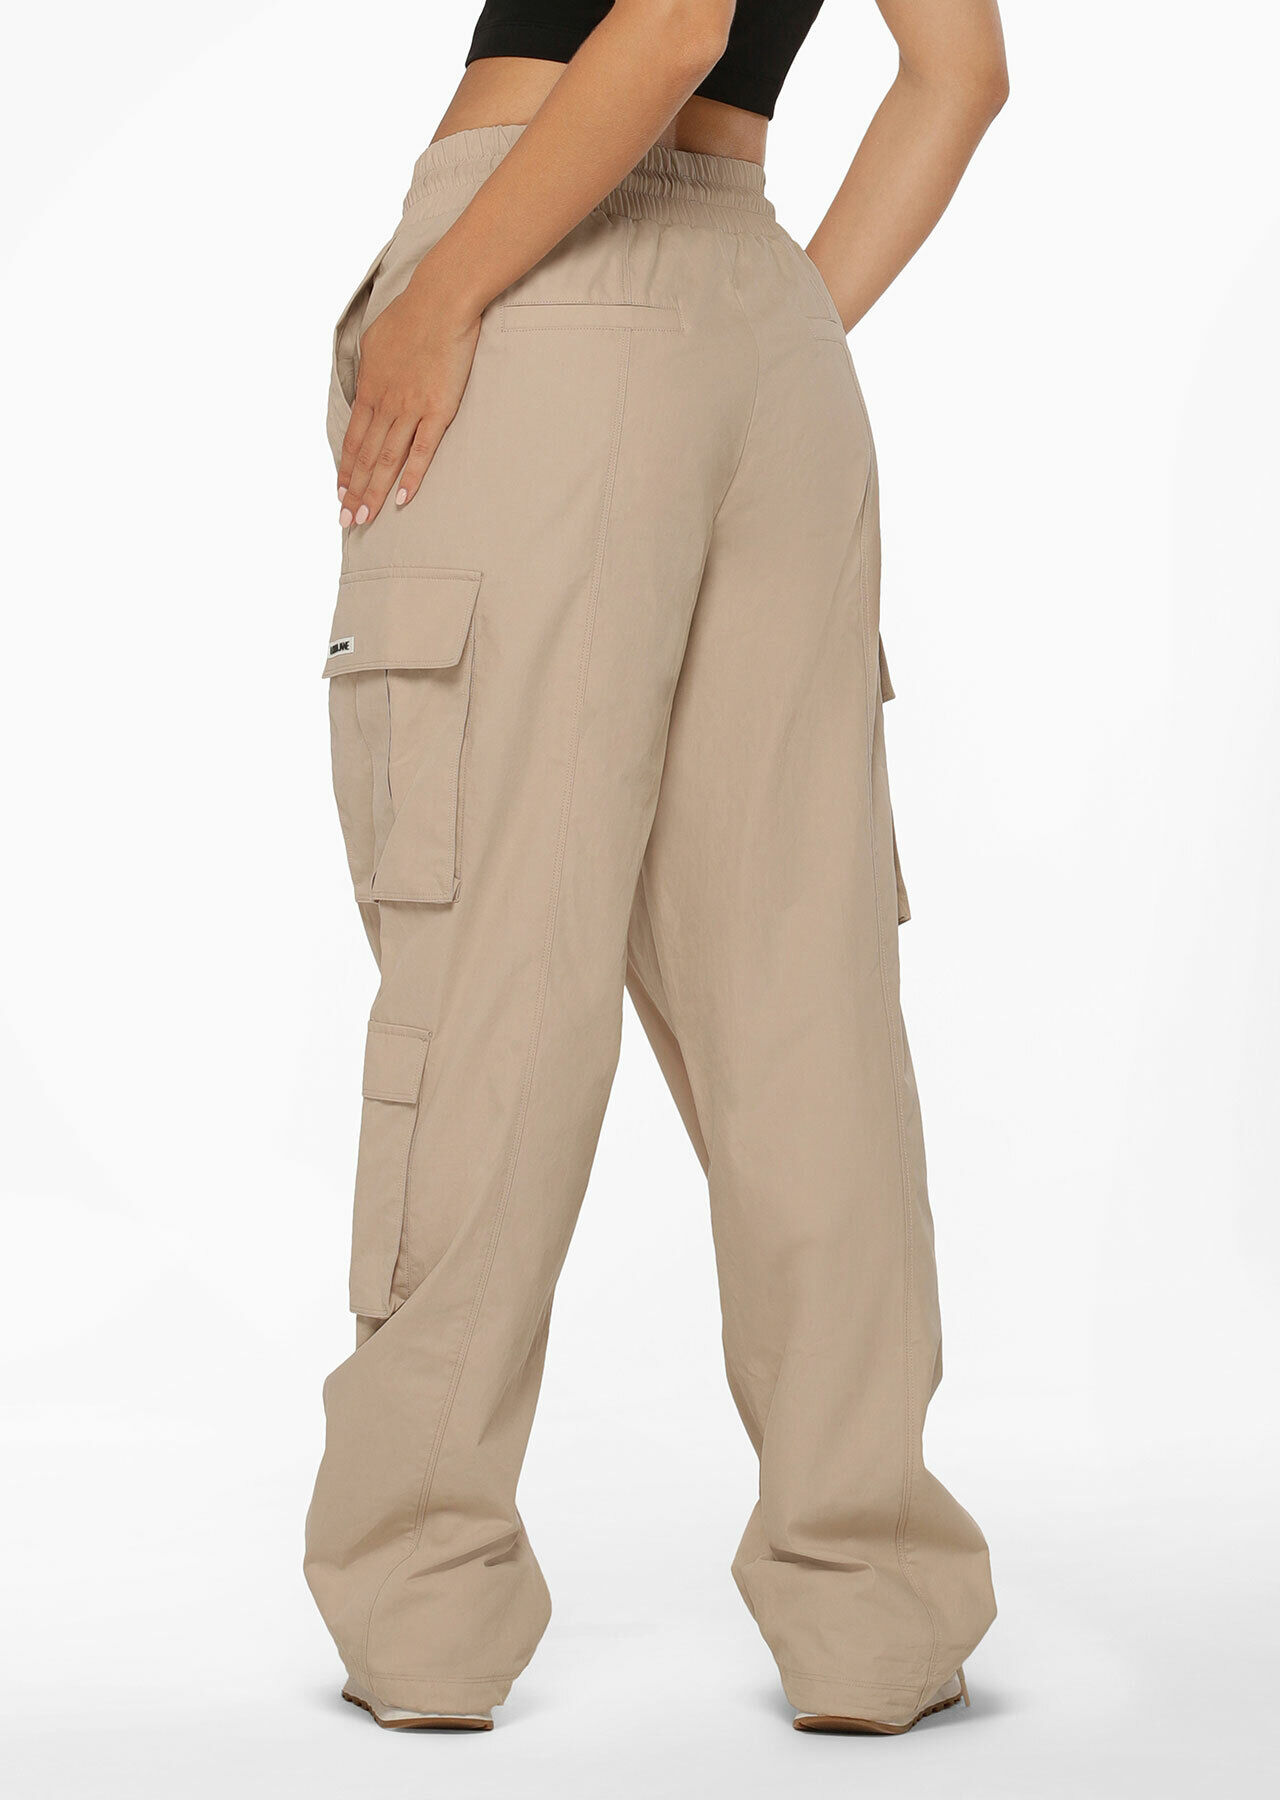 HIGH WAISTED CARGO PANTS in Olive | VENUS | High waisted cargo pants, Pants,  Clothes